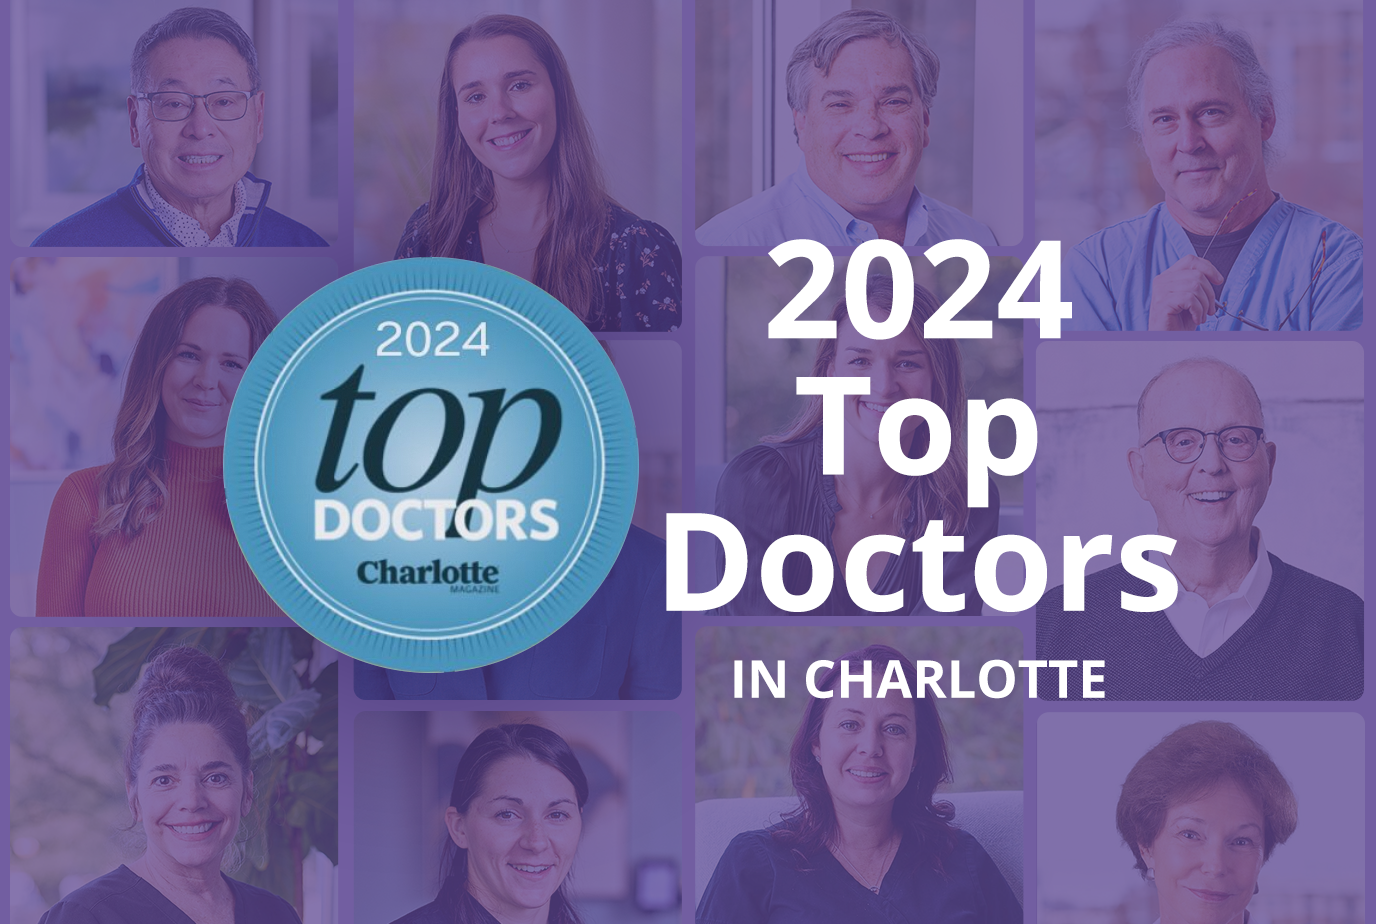 Read the details for Dr. Whelan, Dr. Wing, and Dr. Katz Named Top Doctors in Charlotte for 2024